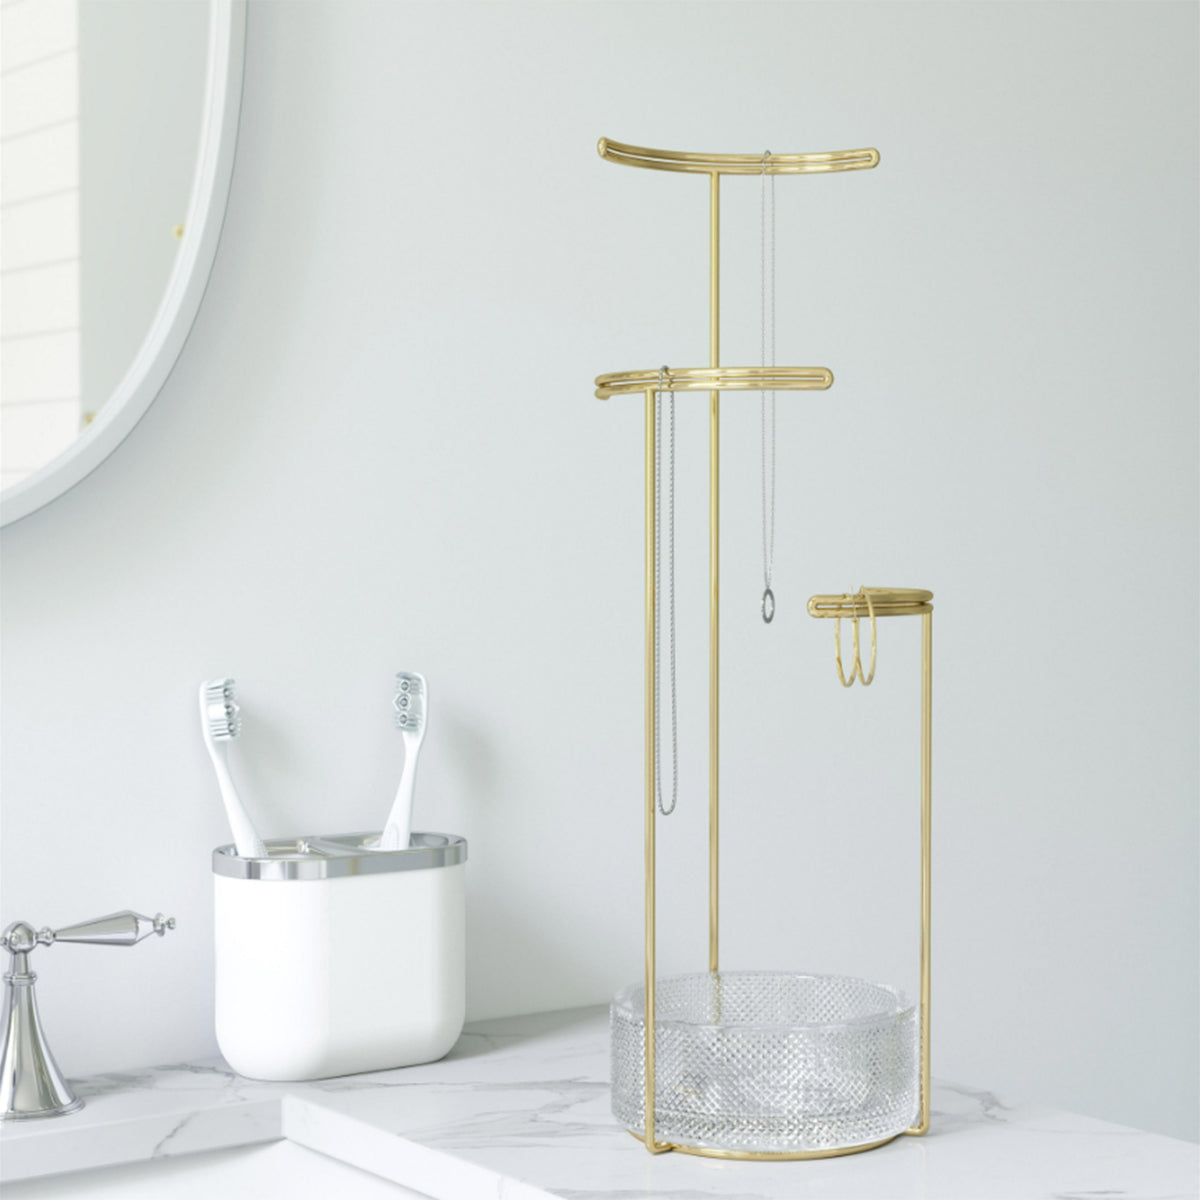 Acrylic Earrings Jewelry Hanging Organizer Display Rack Stand Holder  Showcase Rack Organizer Earring Holder Jewellery Stands X0816 From  Brand_official_01, $5.14 | DHgate.Com